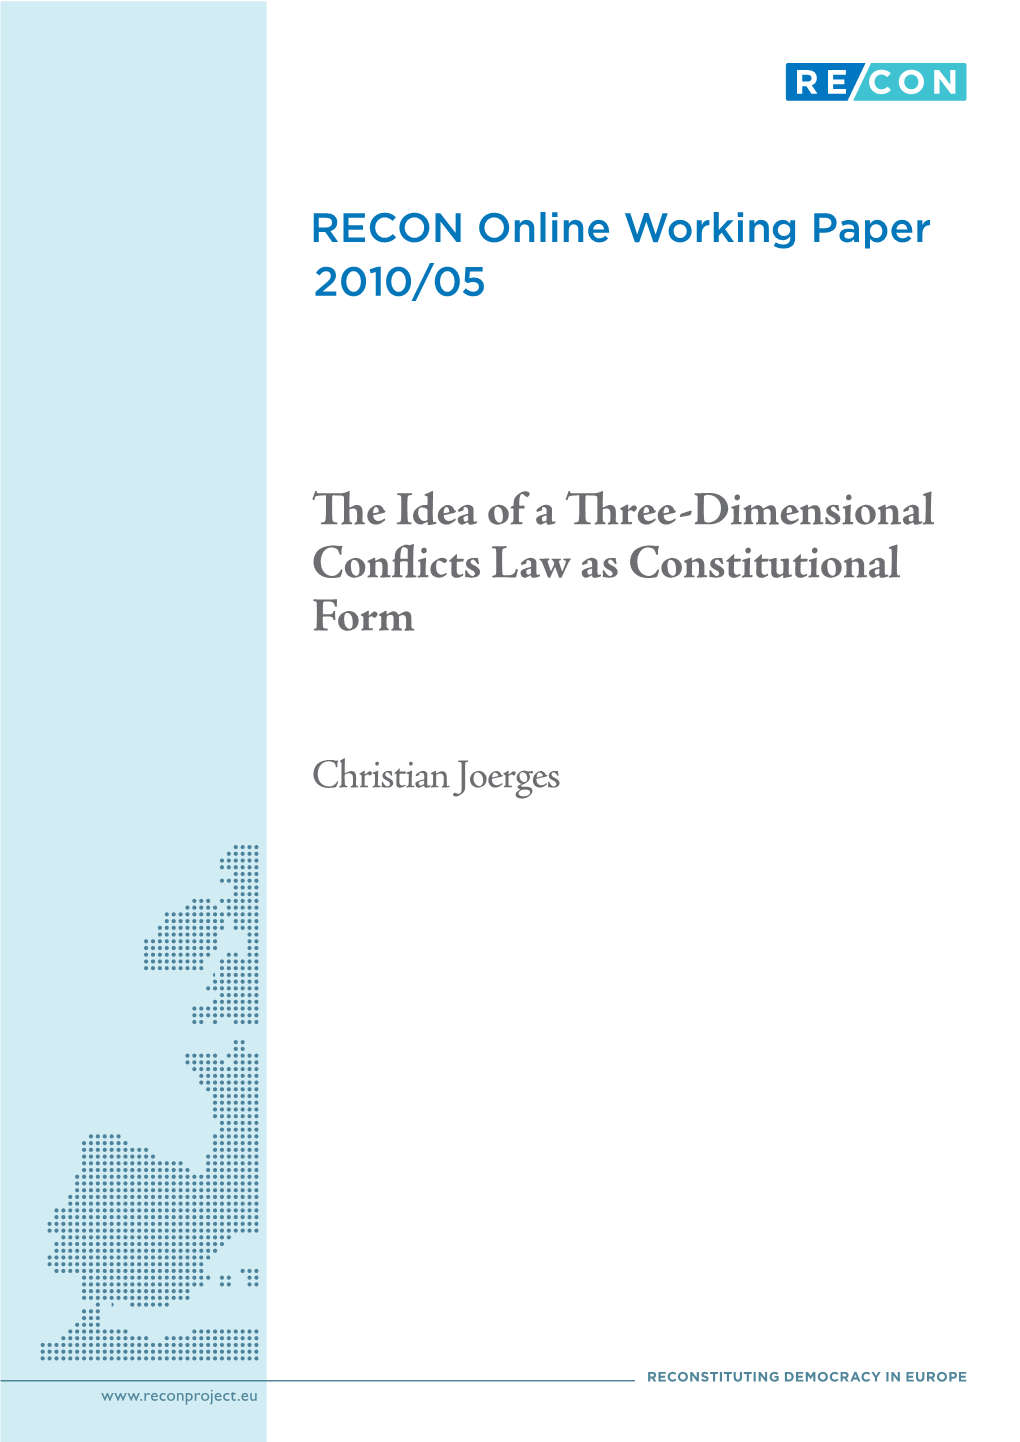 The Idea of a Three-Dimensional Conflicts Law As Constitutional Form